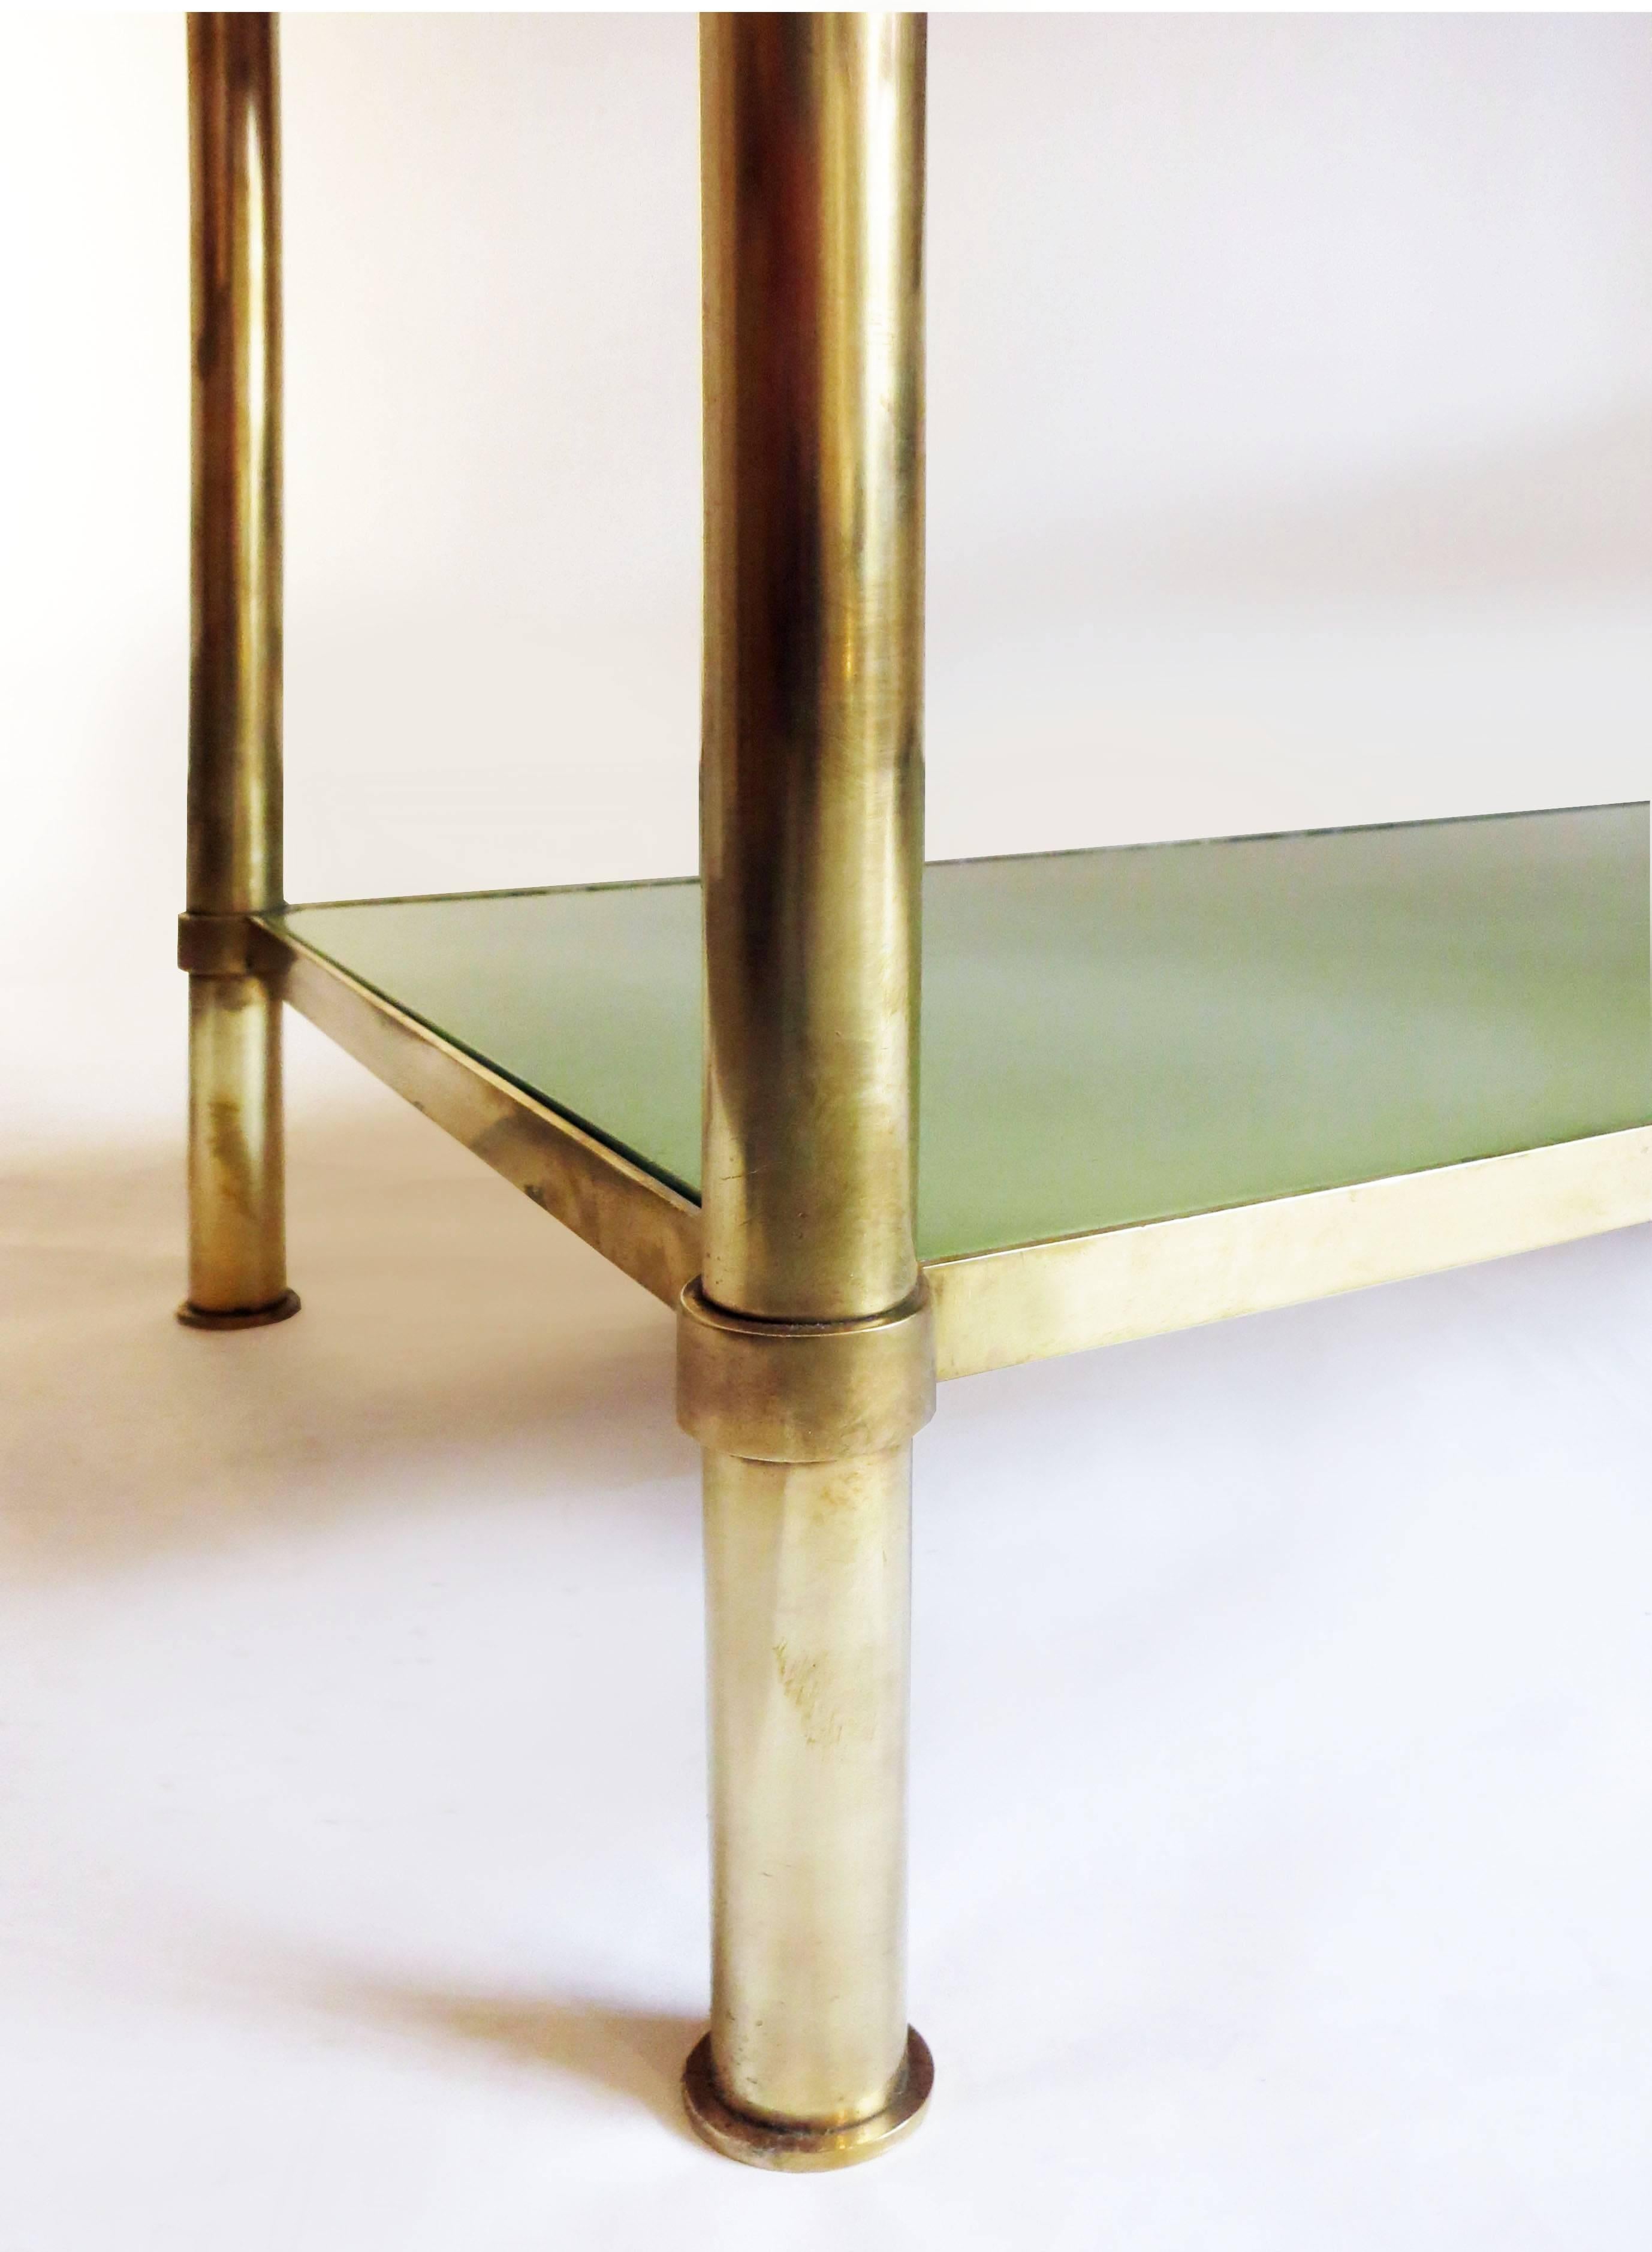 French Andre Arbus Lacquer and Brass Coffee Table, 1950s For Sale